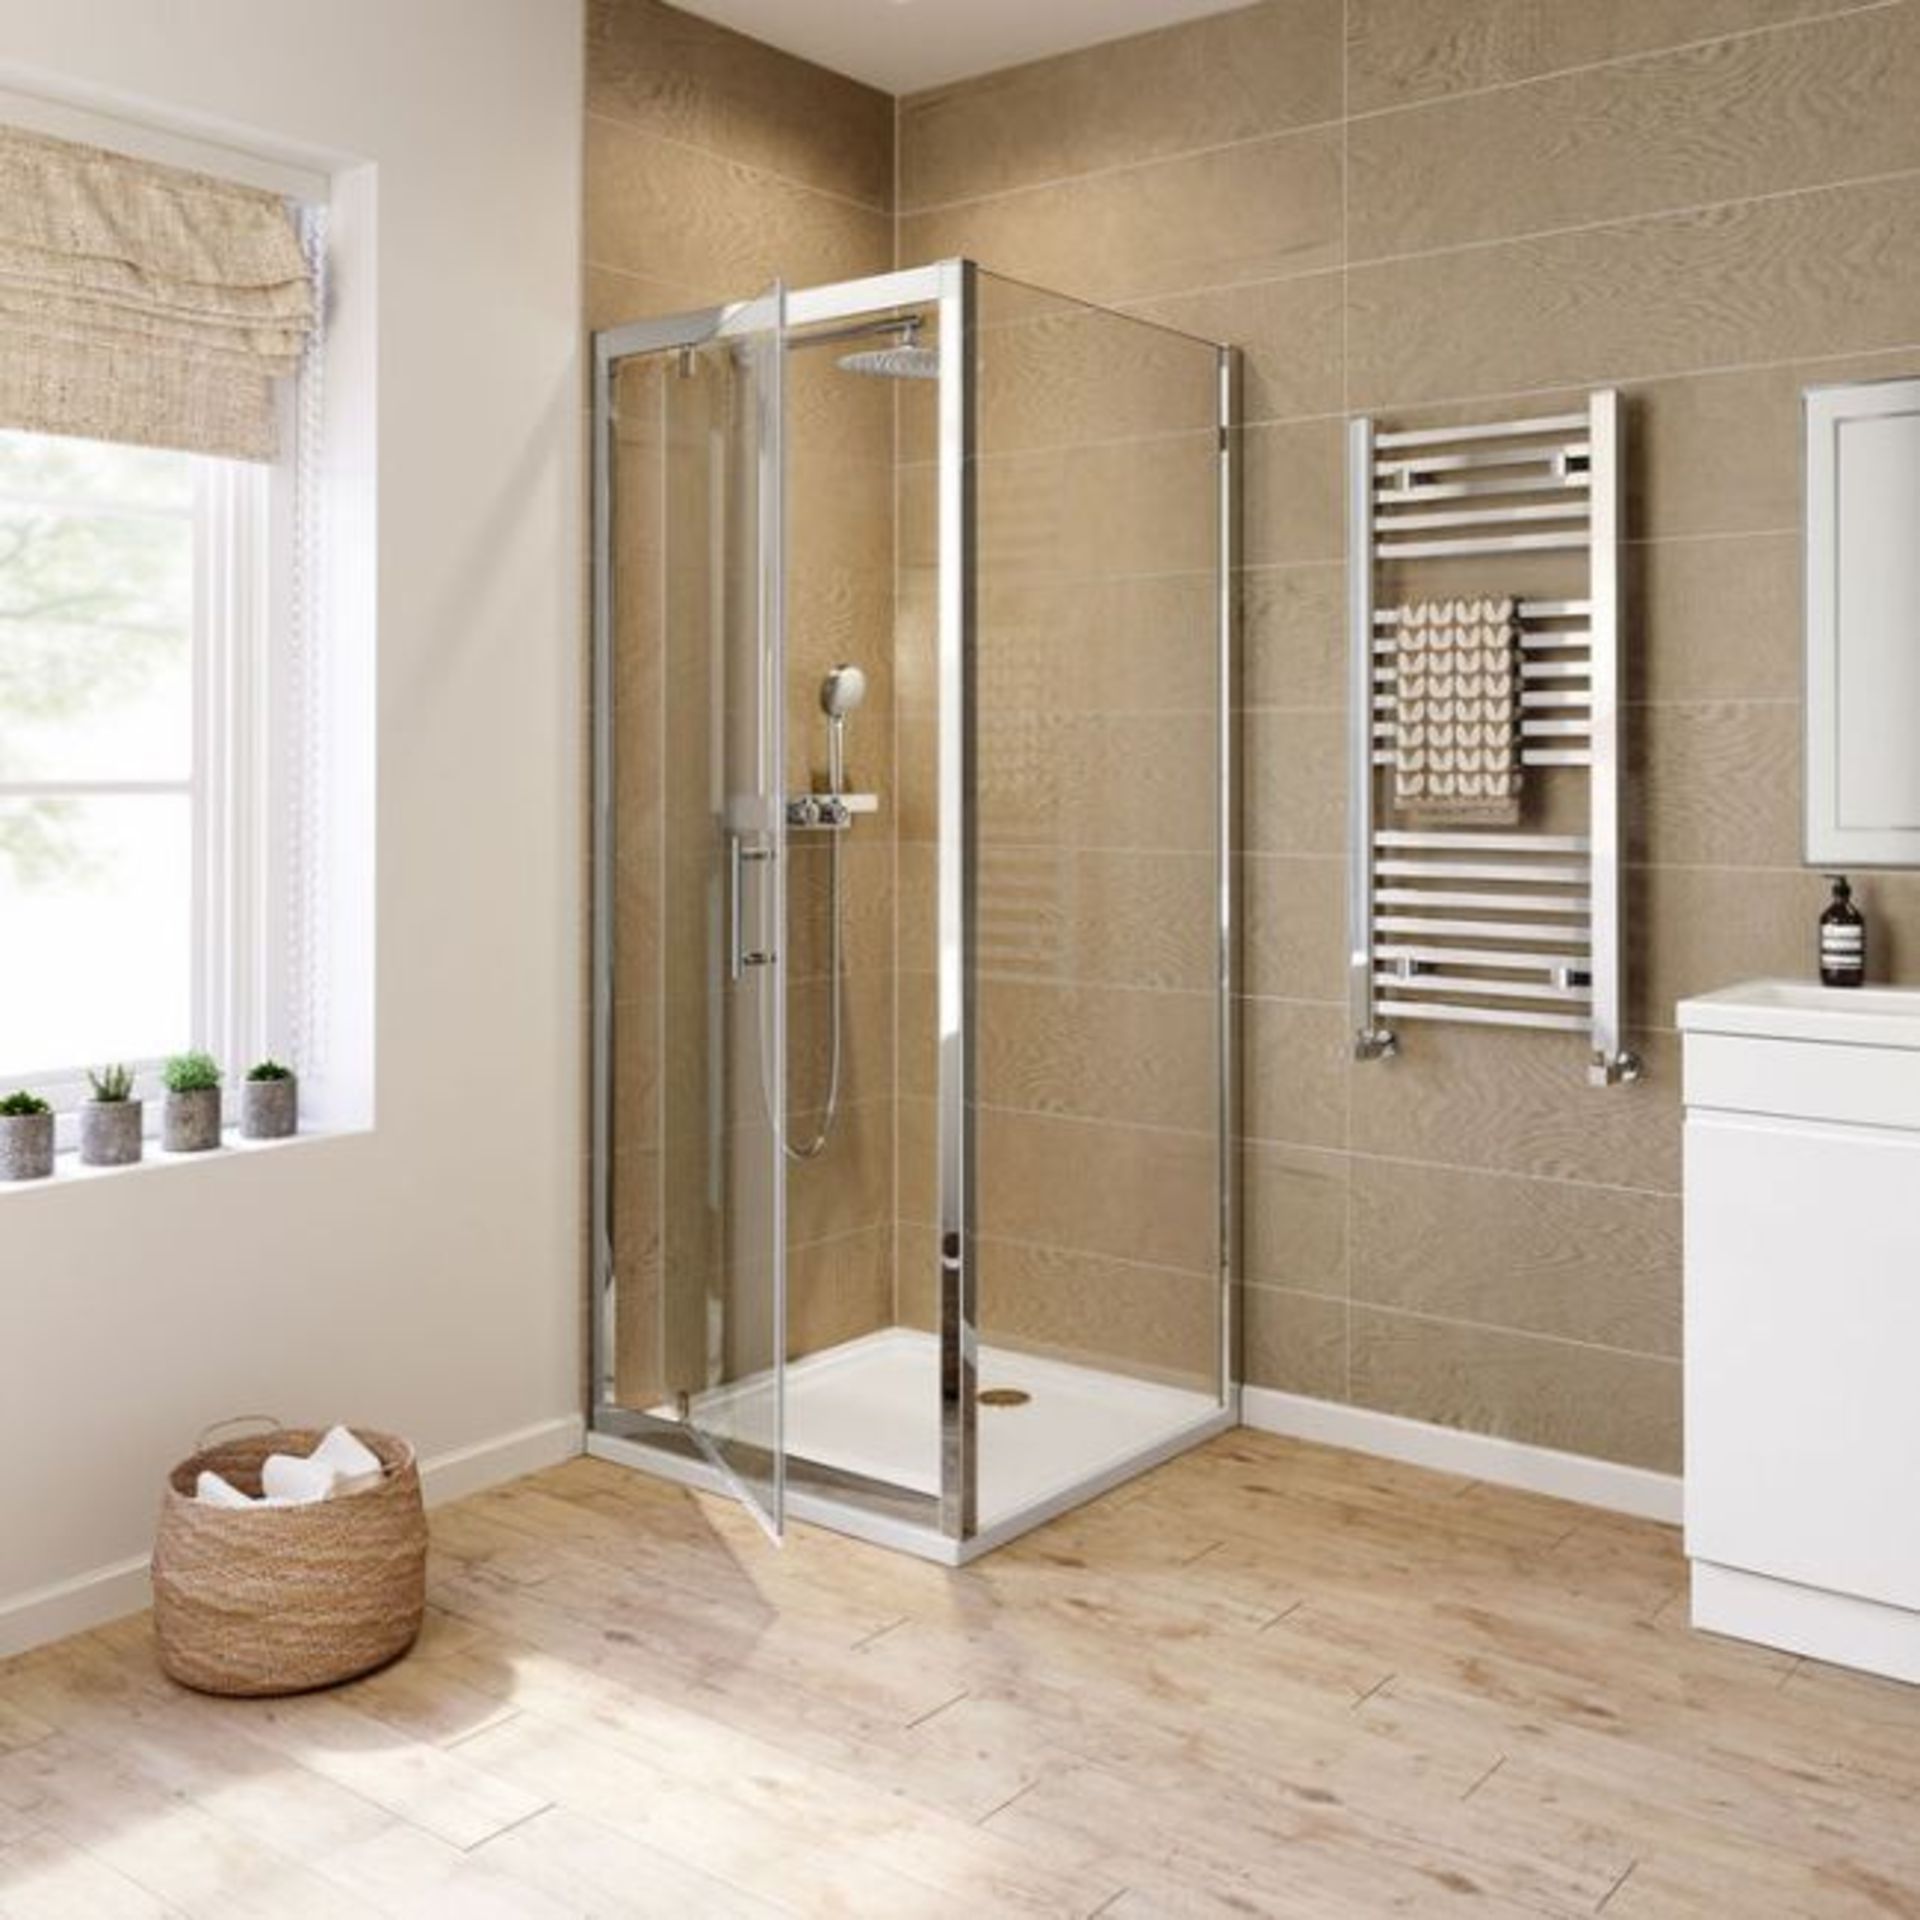 New 700x700 mm - 6 mm - Elements Pivot Door Shower Enclosure. RRP £330.99.6 mm Safety Glass Fully... - Image 2 of 2